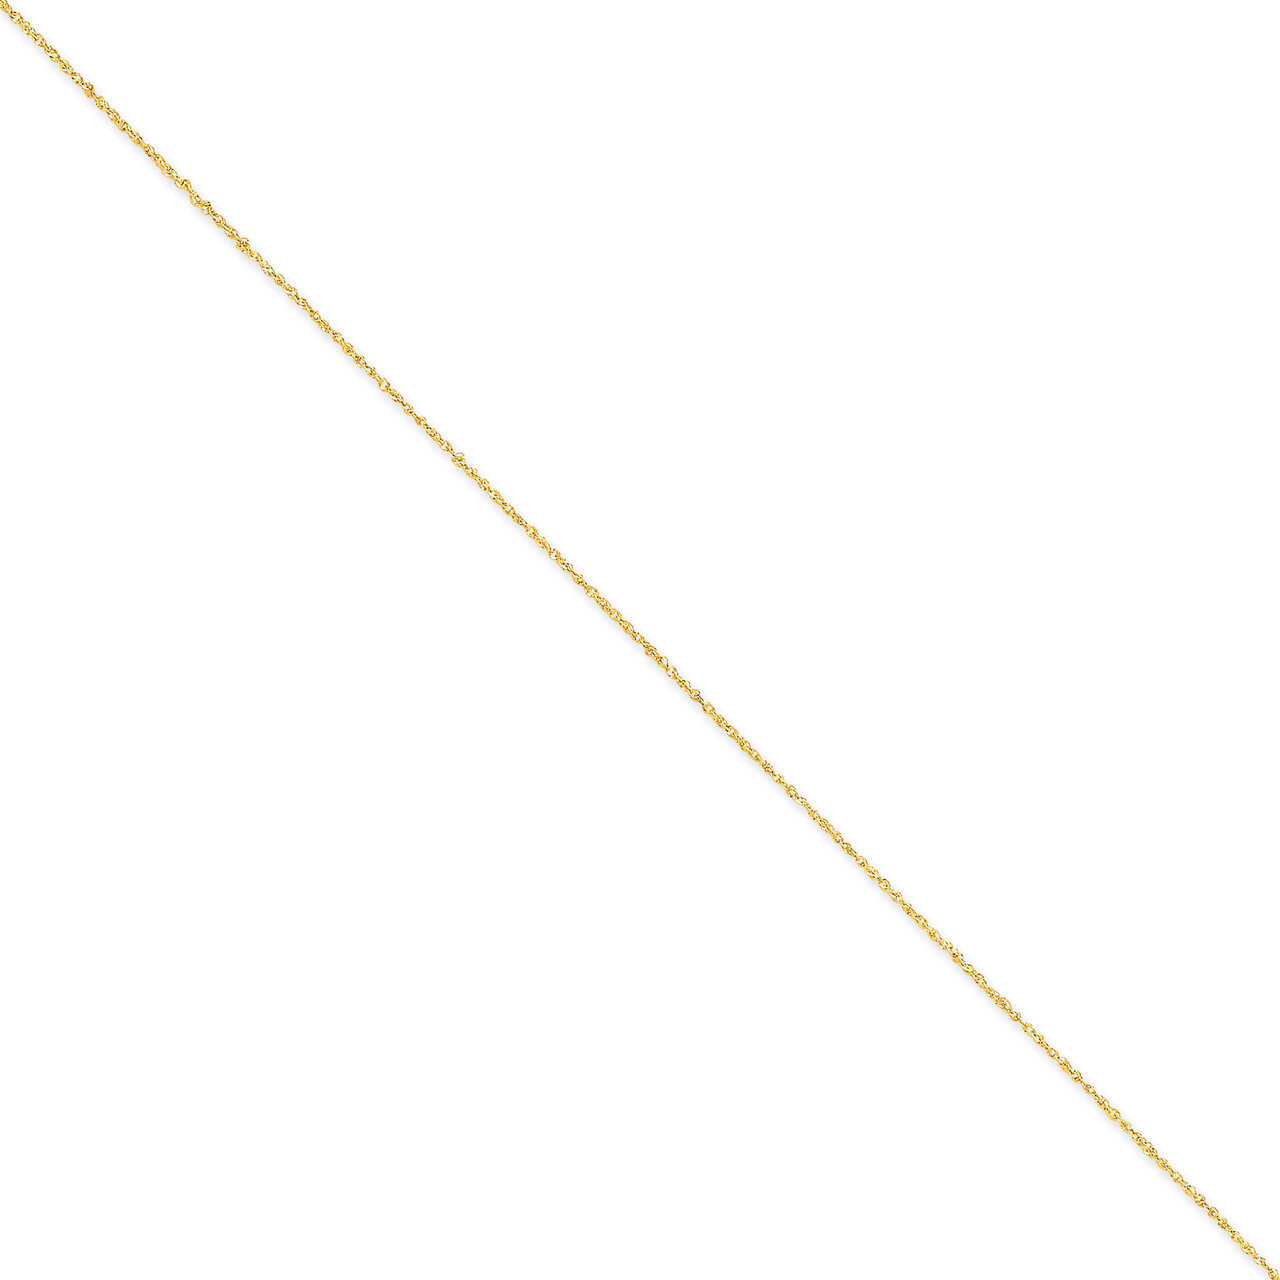 1.1mm Ropa Chain 24 Inch 14k Gold RPA020-24